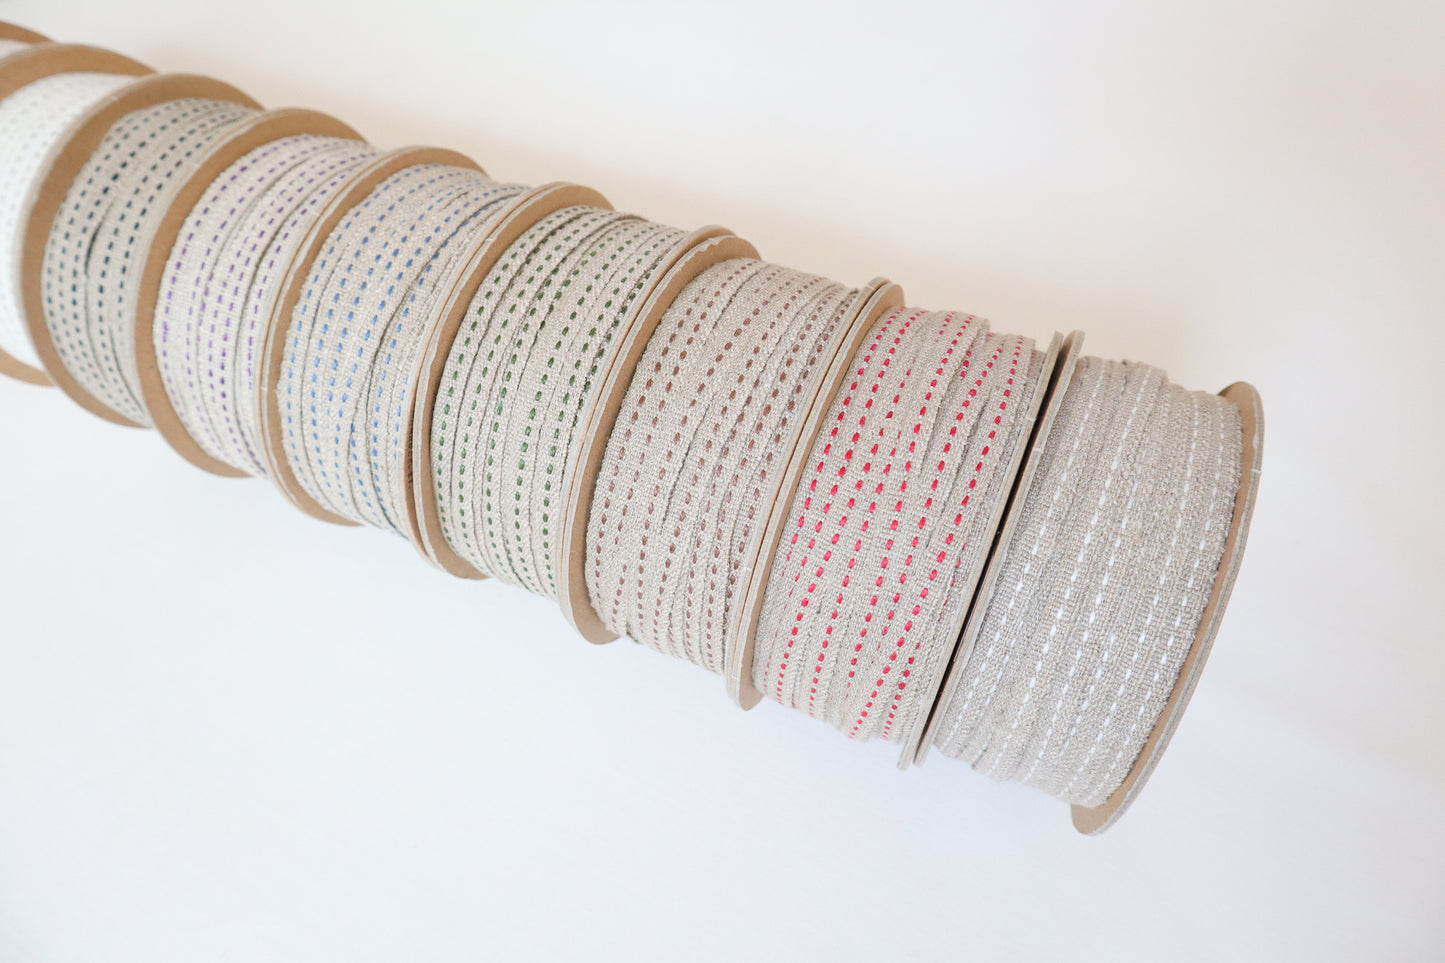 5mm Stitched ribbon/ tape in 100% washed linen